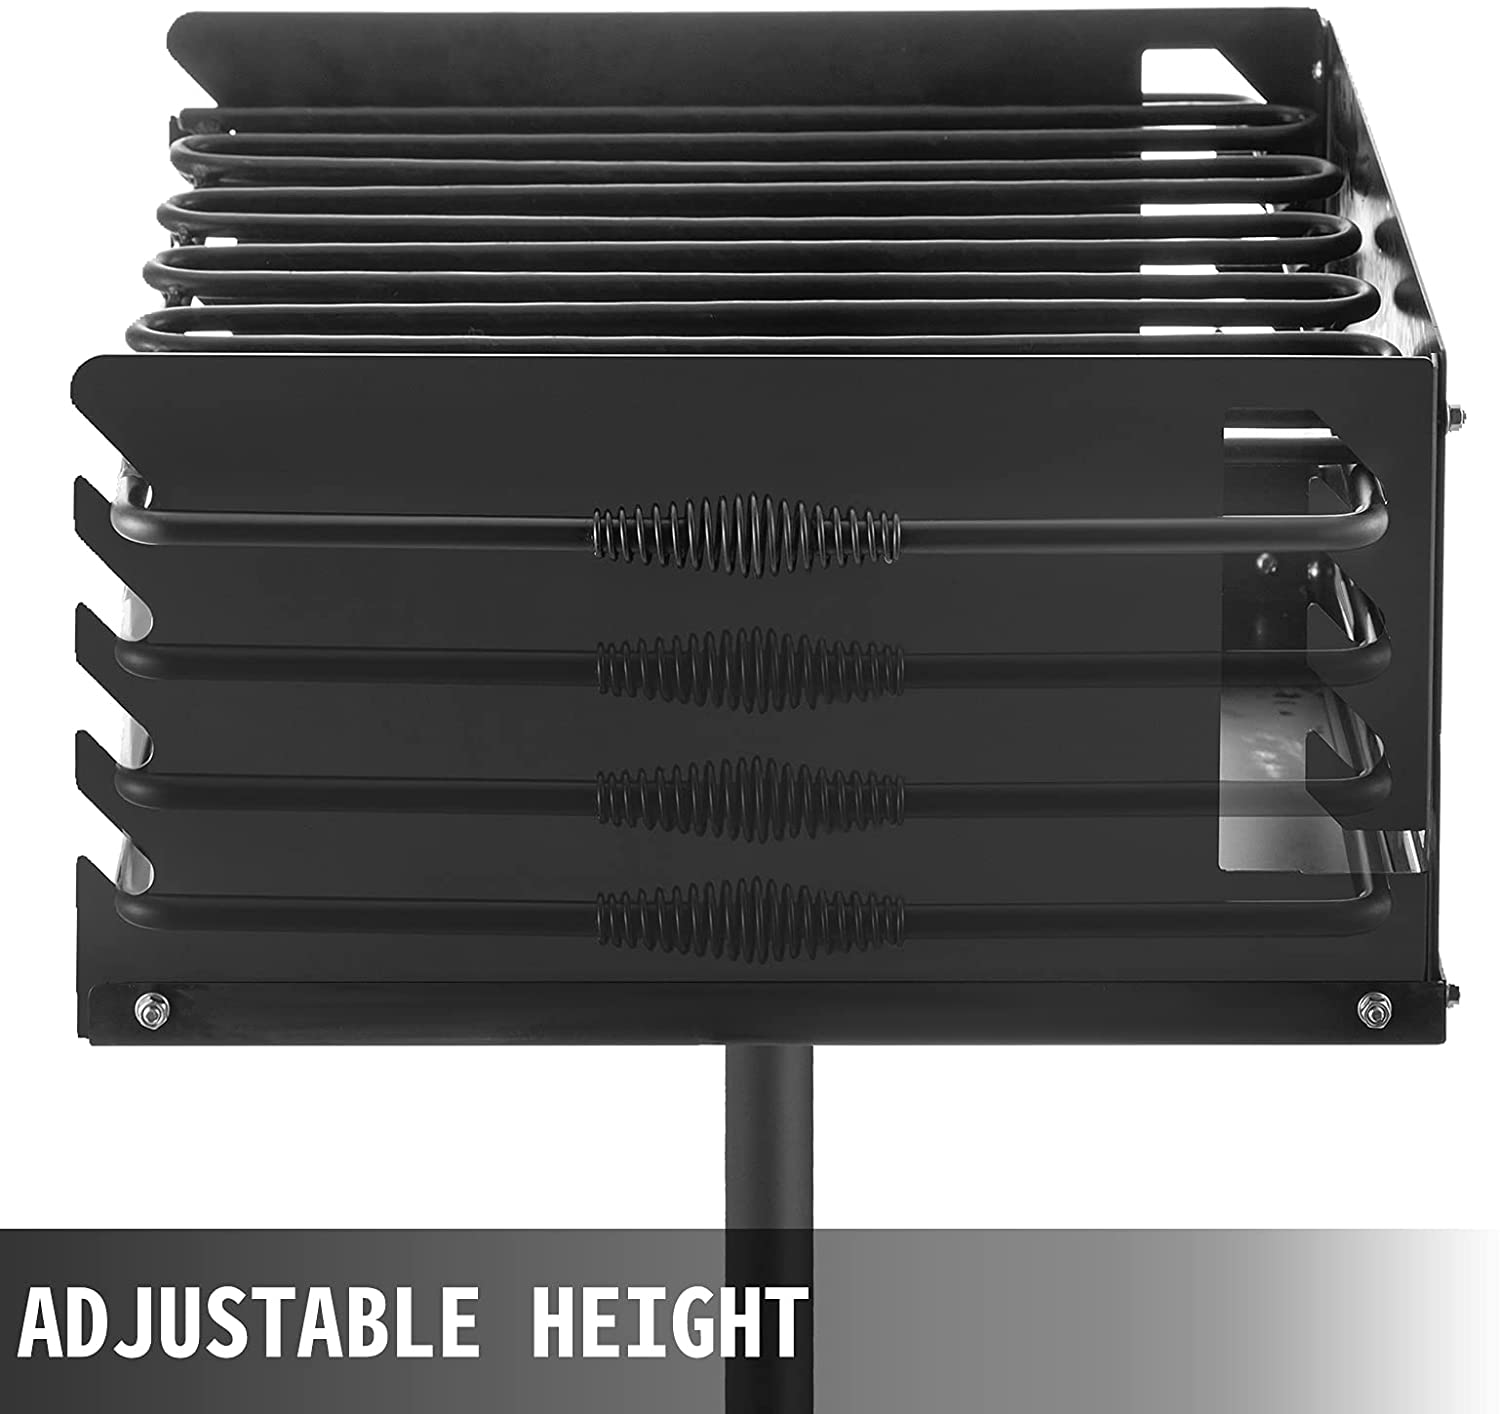 VEVOR Outdoor Park Style Grill 20x14 inch with Base Plate Park Style Charcoal Grill Carbon Steel Park Style BBQ Grill Adjustable Park Charcoal Grill Stainless Steel Grate Outdoor Park Grill - image 4 of 9